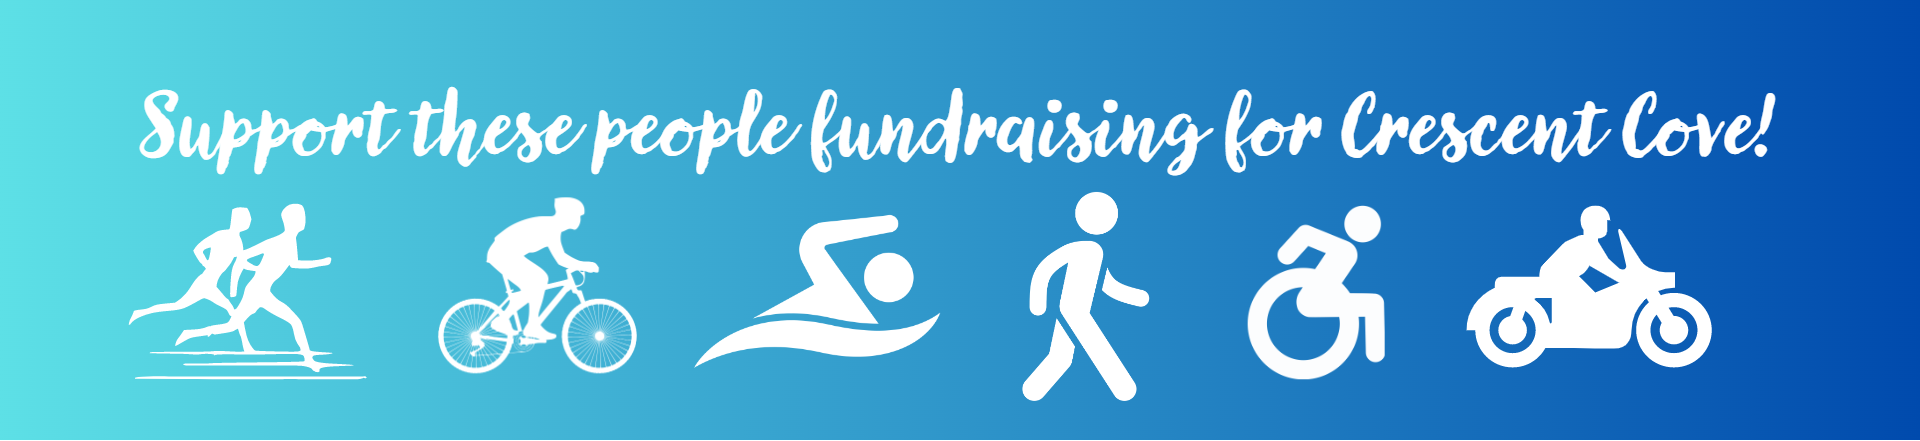 support-fundraisers-for-cc-webpage-header.png